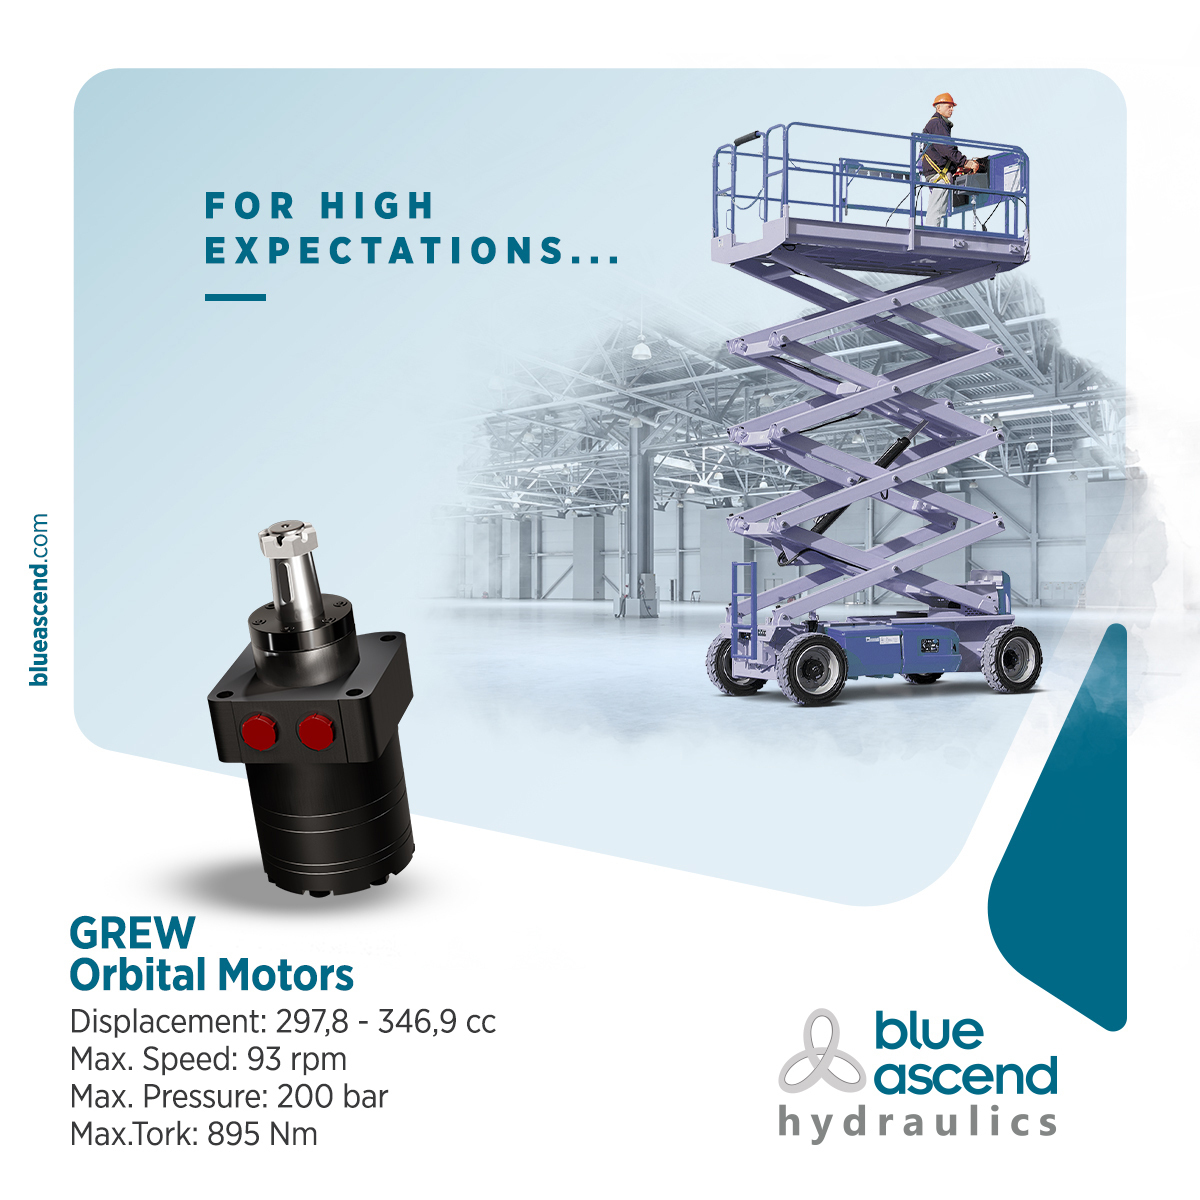 For high expectations...

GREW Orbital Motors
🔹 Displacement: 297,8 - 346,9 cc
🔹 Max. Speed: 93 rpm
🔹 Max. Pressure: 200 bar
🔹 Max.Tork: 895 Nm

👇 Explore our orbital motors by visiting our website.
bit.ly/46acxaw

#BlueAscend #OrbitalMotor #Manlift #MakaslıPlatform